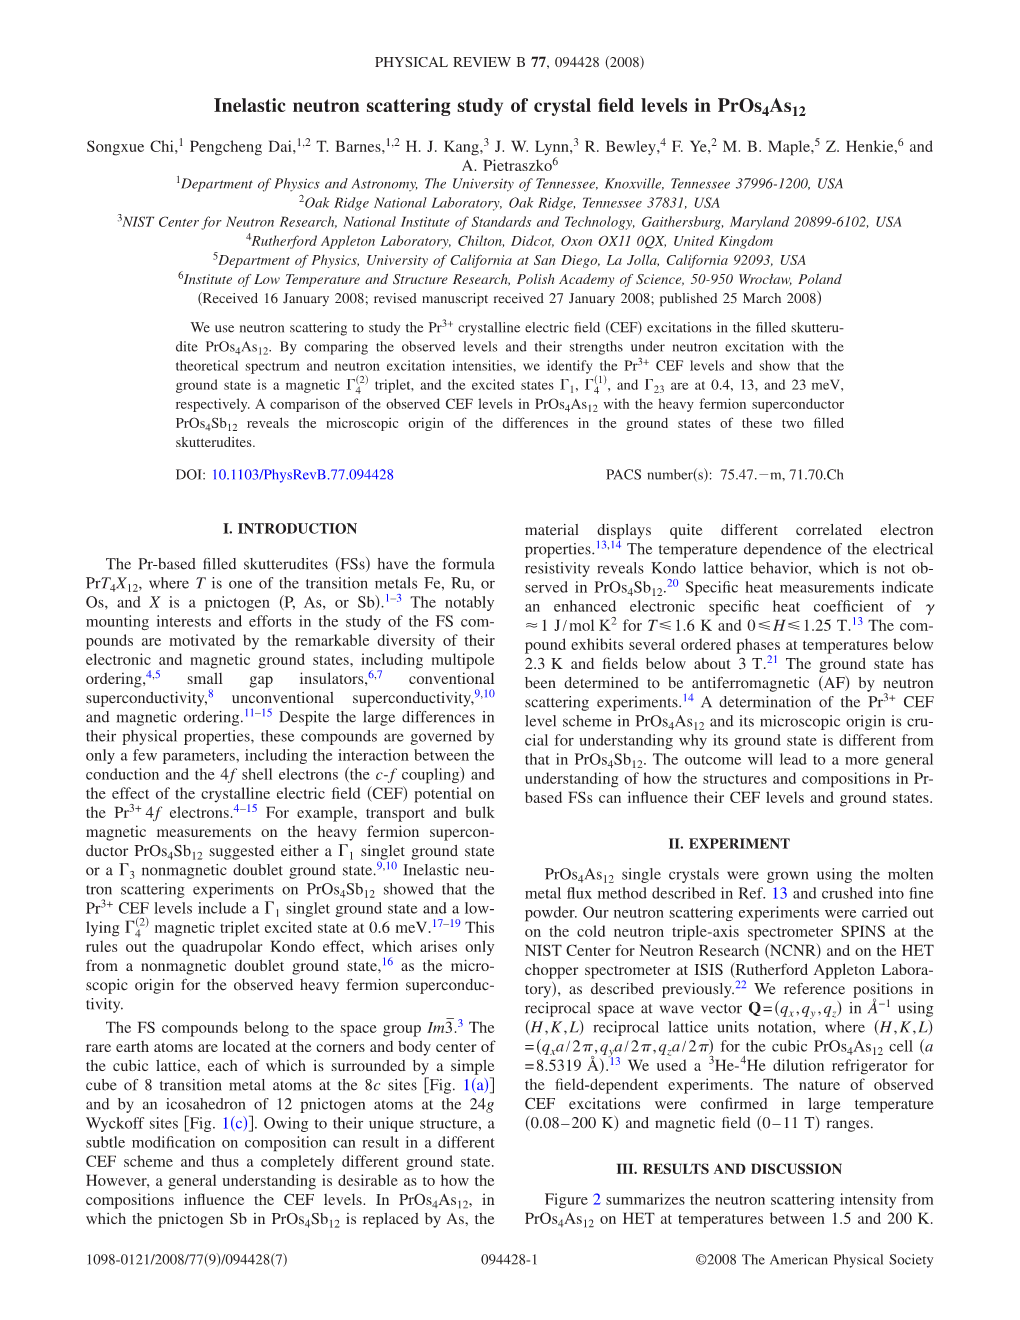 Inelastic Neutron Scattering Study of Crystal Field Levels in Pros4as12